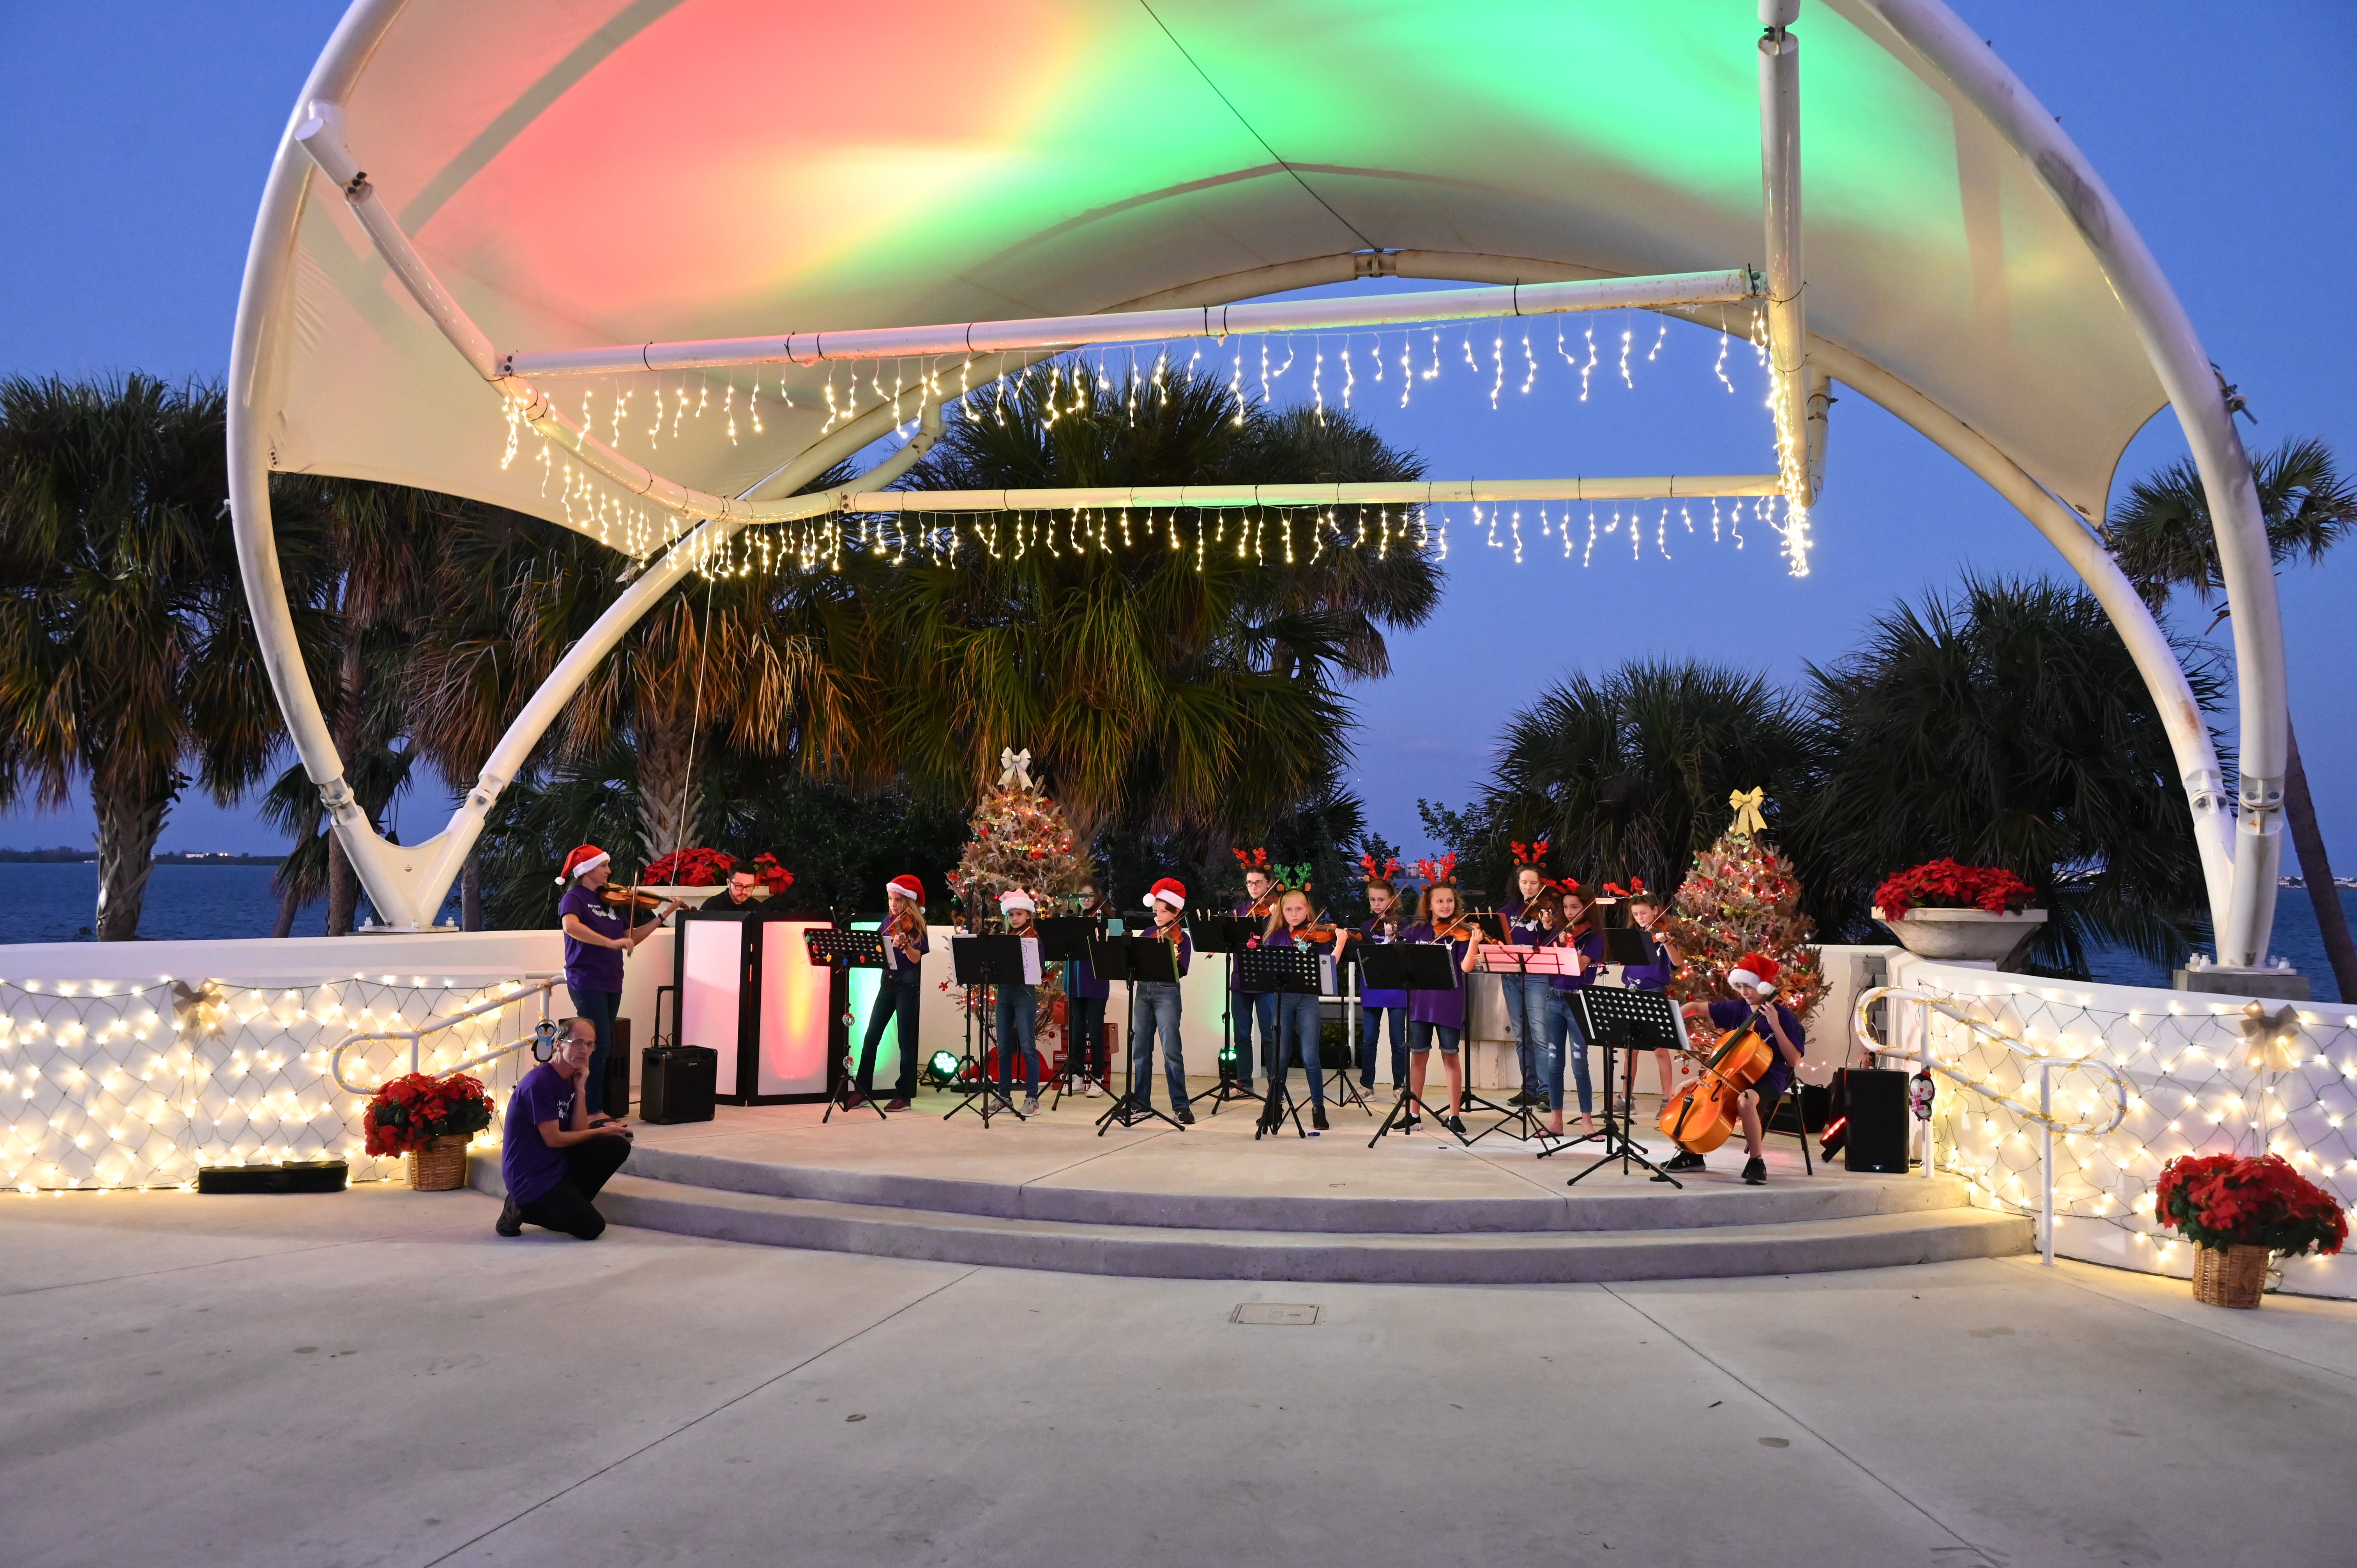 Image of student performers at Winterfest at the Mansion at Tuckahoe in Jensen Beach, FL.